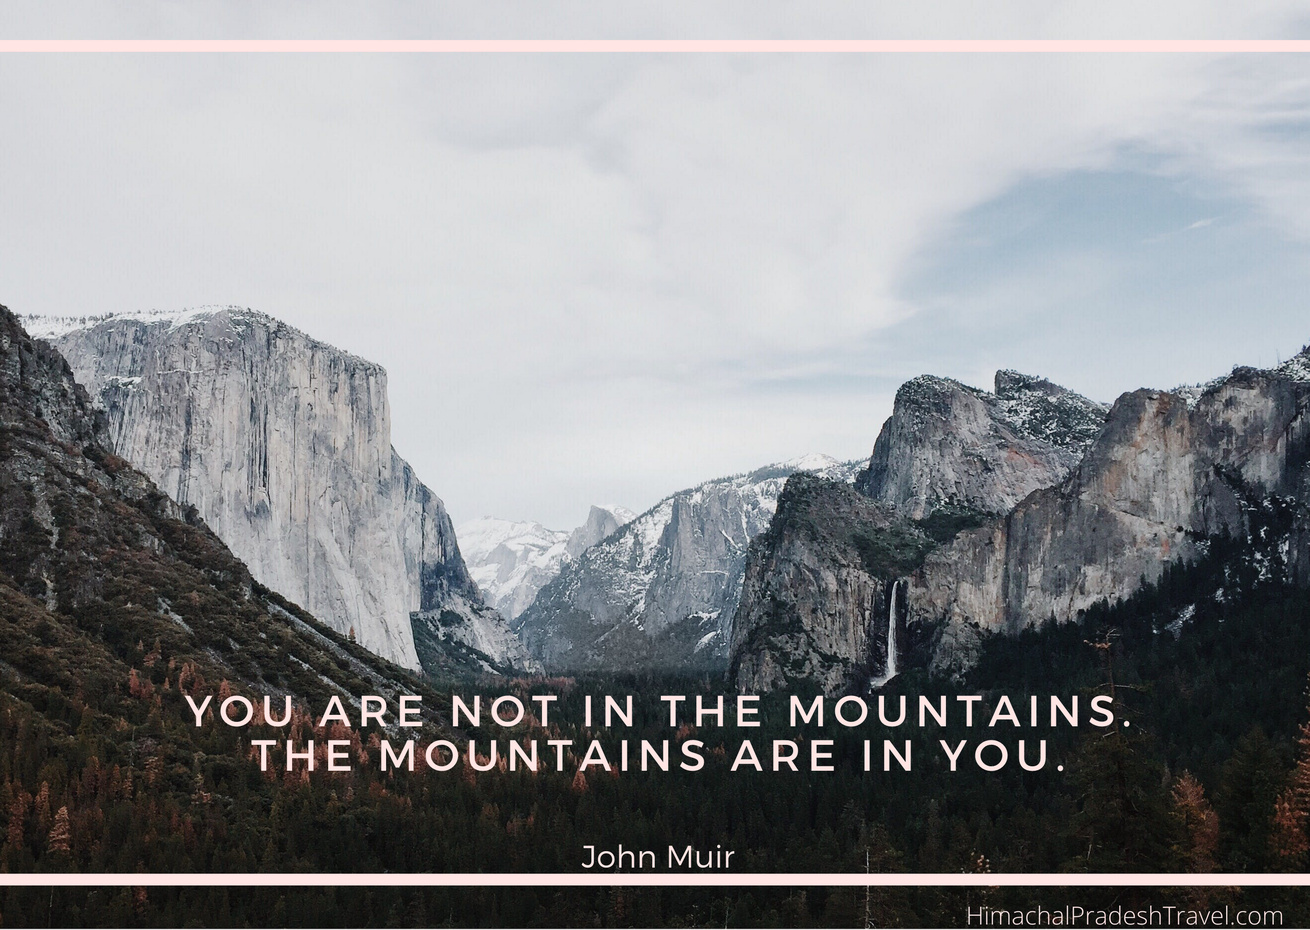 “You are not in the mountains. The mountains are in you.” -John Muir